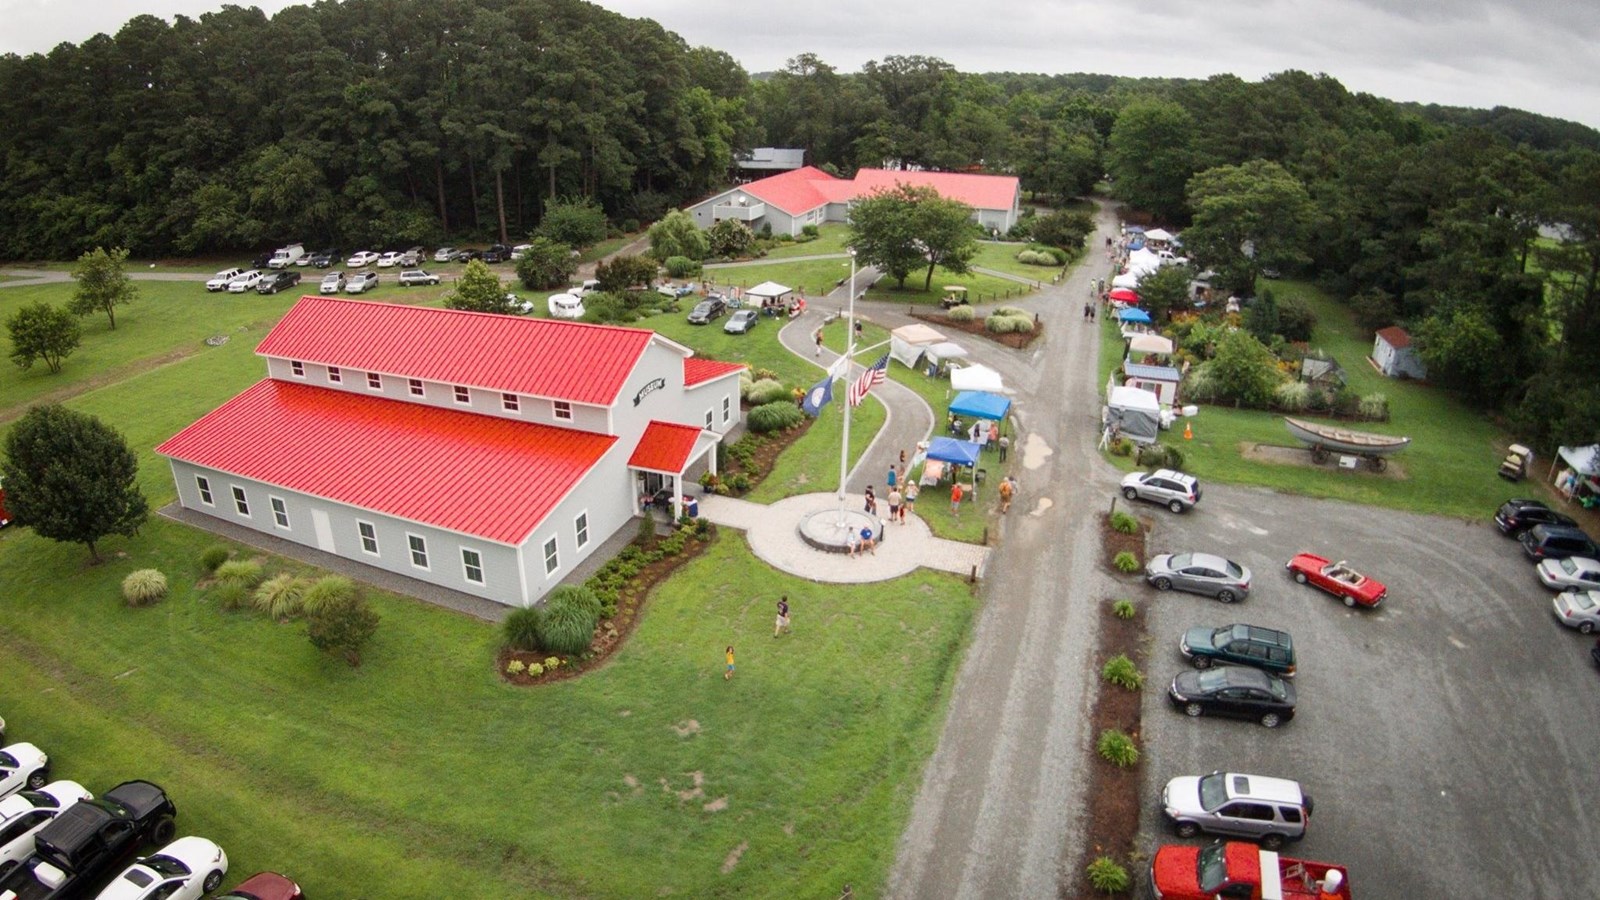 Aerial view of the museum building with parking lot, fields and trees surrounding